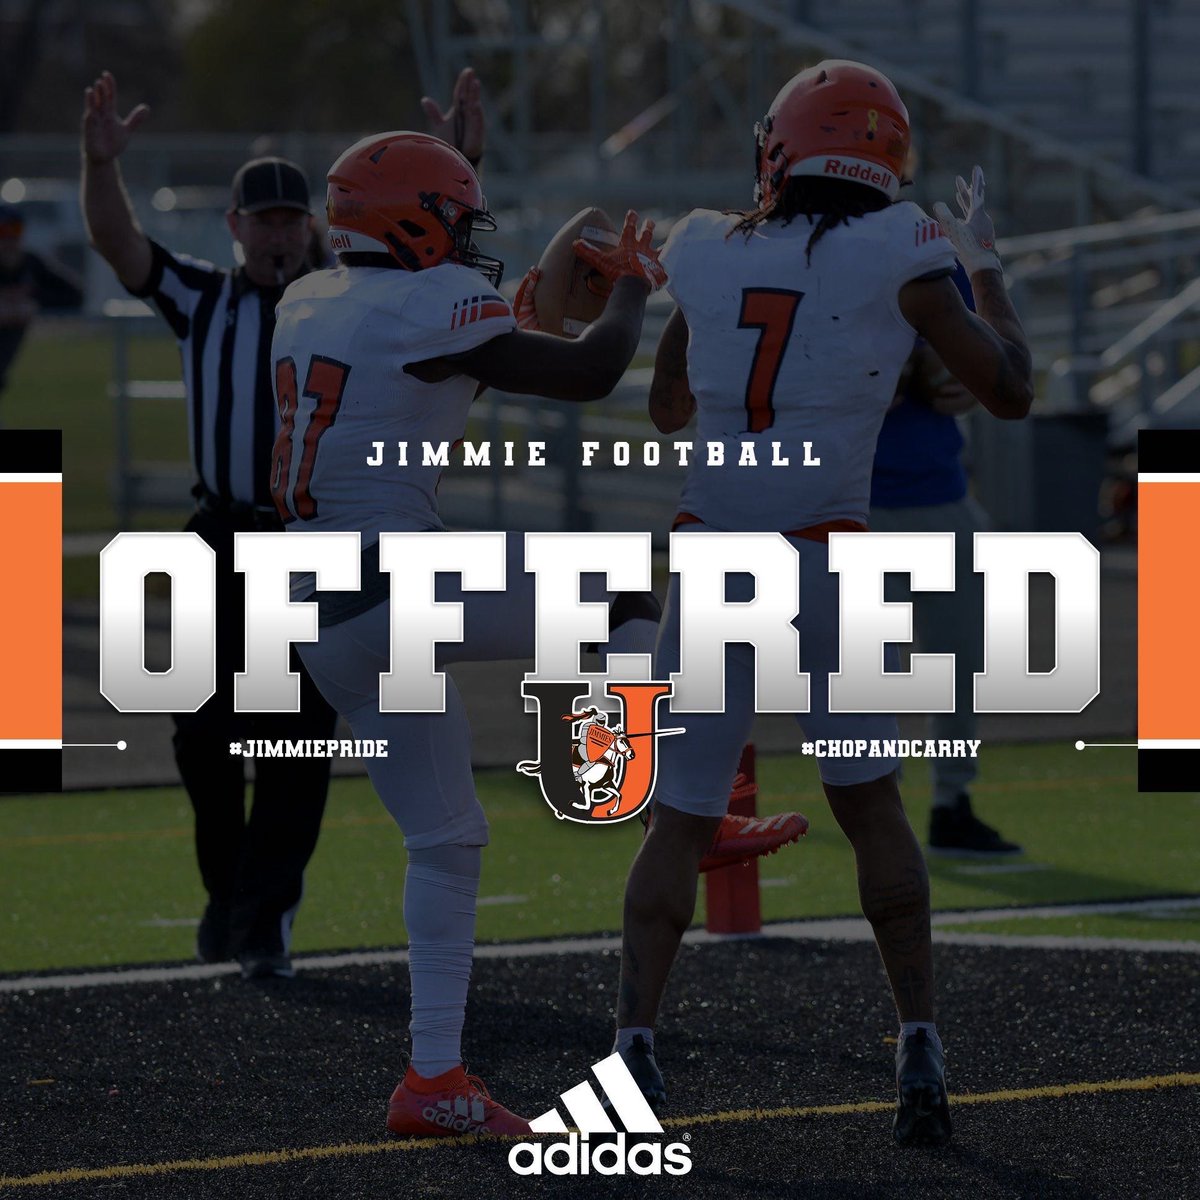 After great conversations with @CoachZim_UJ and @Coach_Mistro I am very excited to announce an offer to play for the University of Jamestown! @CoachSpencerP @JordanJ_ @CoachPerrone @eforcefootball @GoPacerFootball @BrandonHuffman @AndrewNemec @PrepRedzoneOR